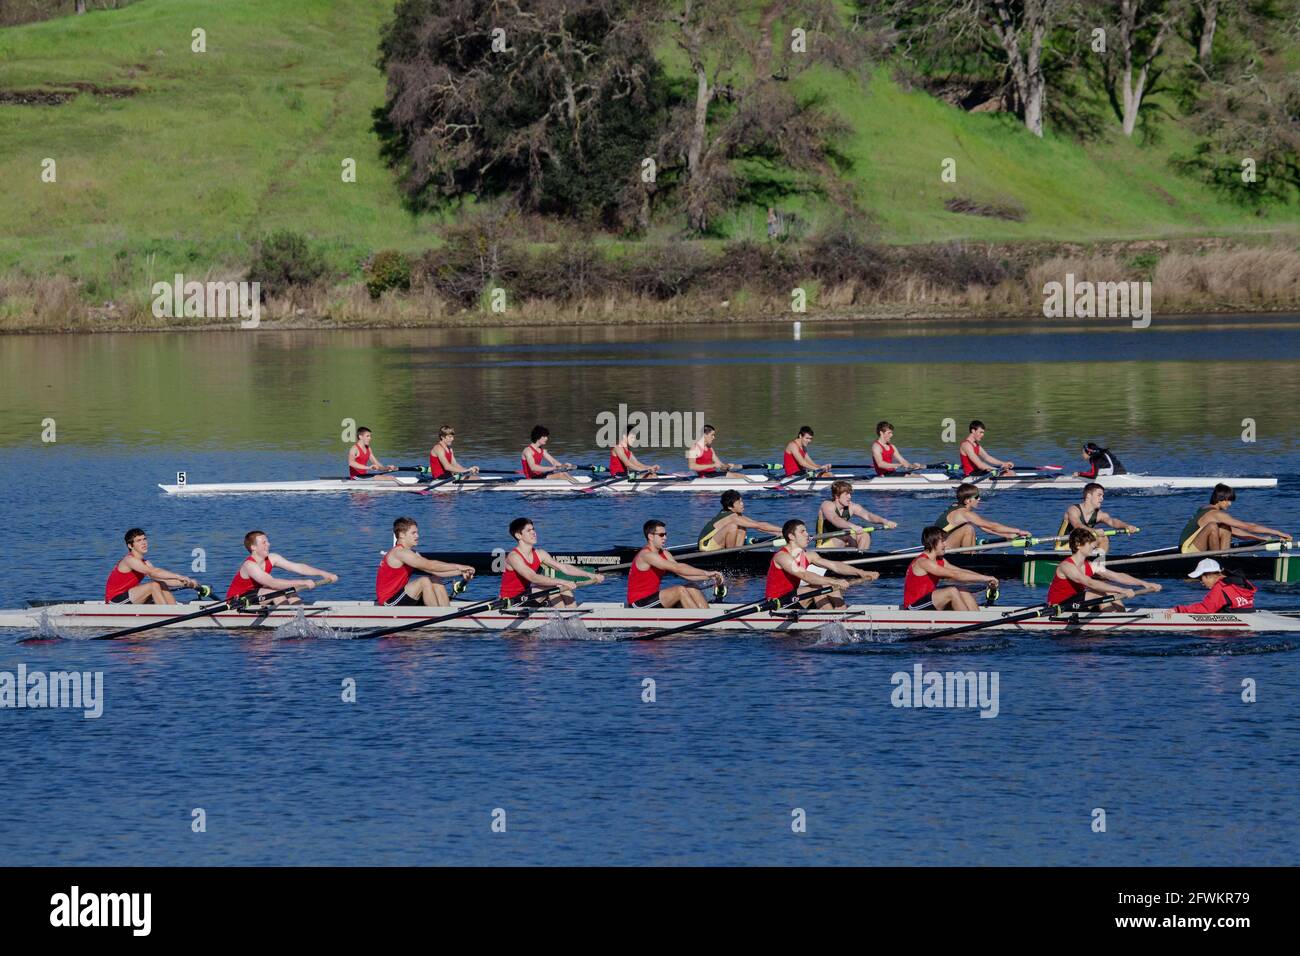 Young men's eight rowing teams in close race during regatta in Lake Natoma, California Stock Photo